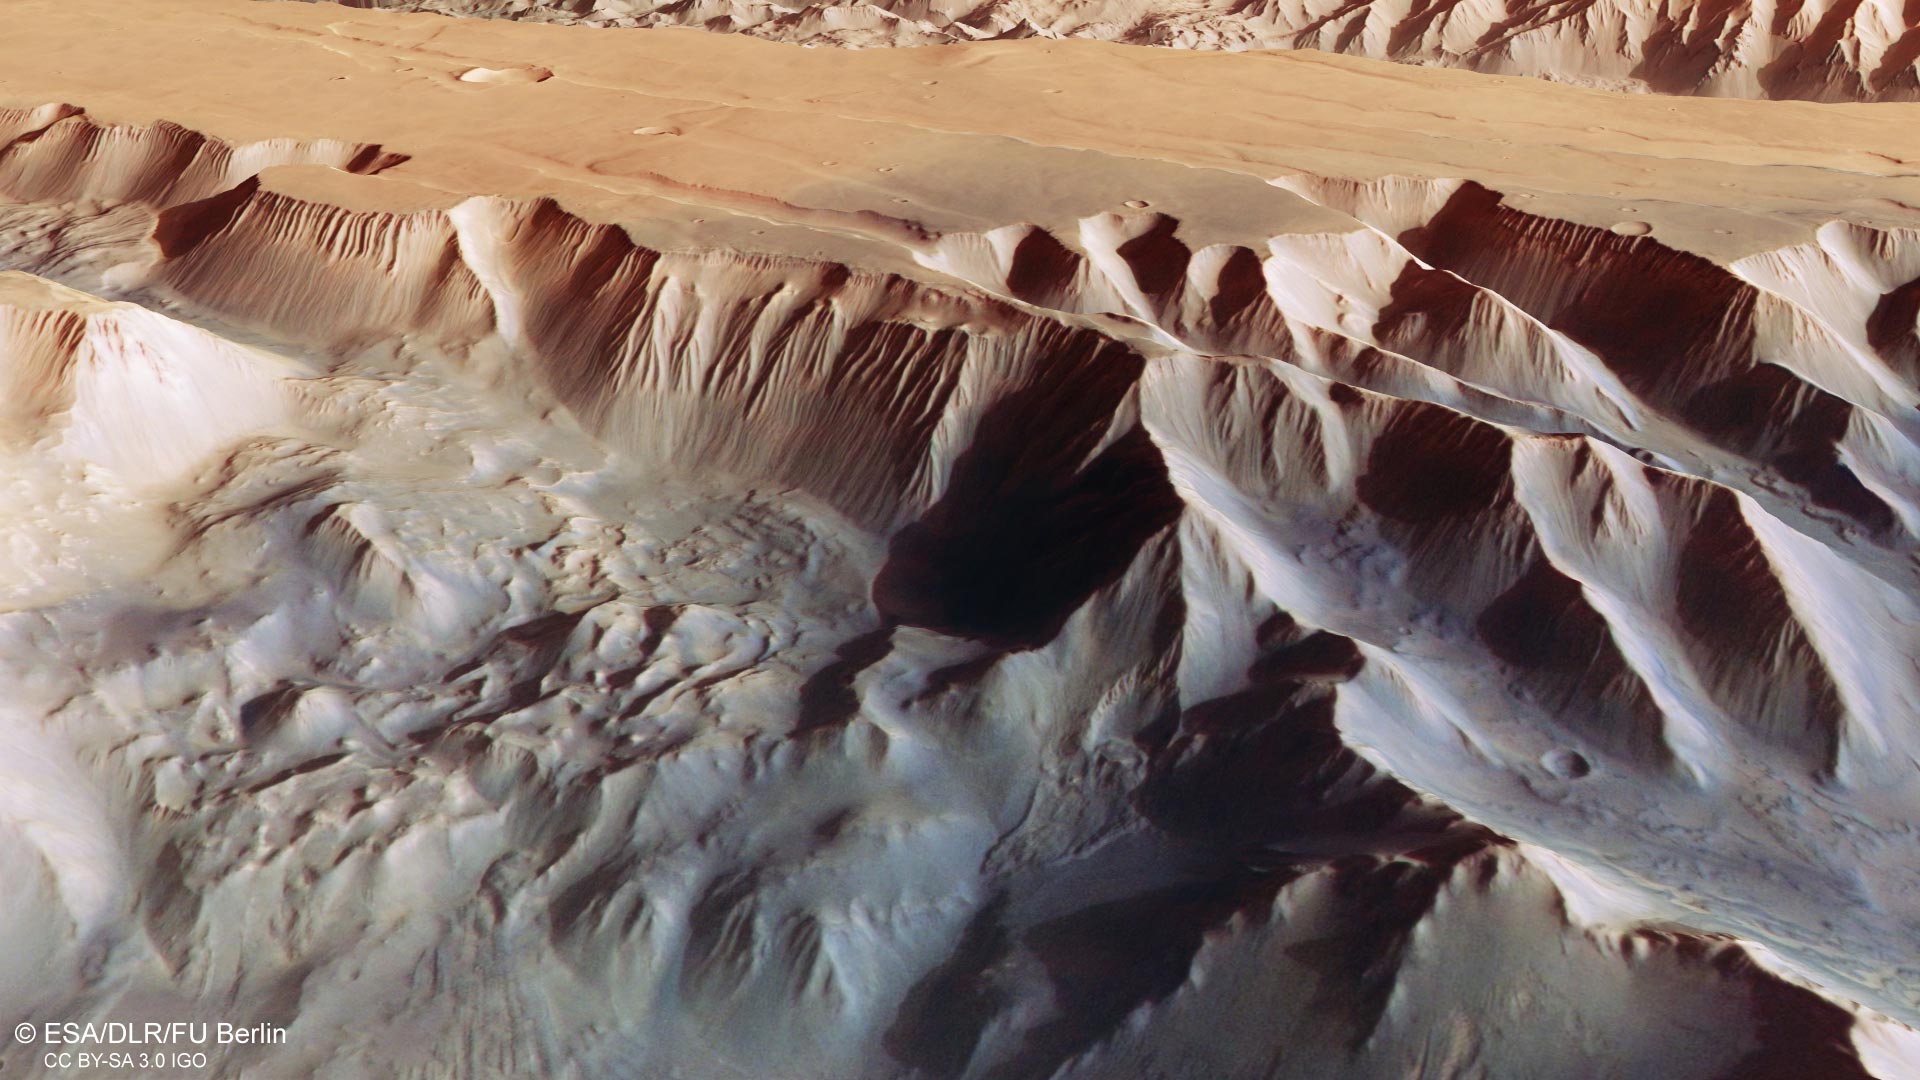 Mars Express captures stunning images of the huge Martian valley